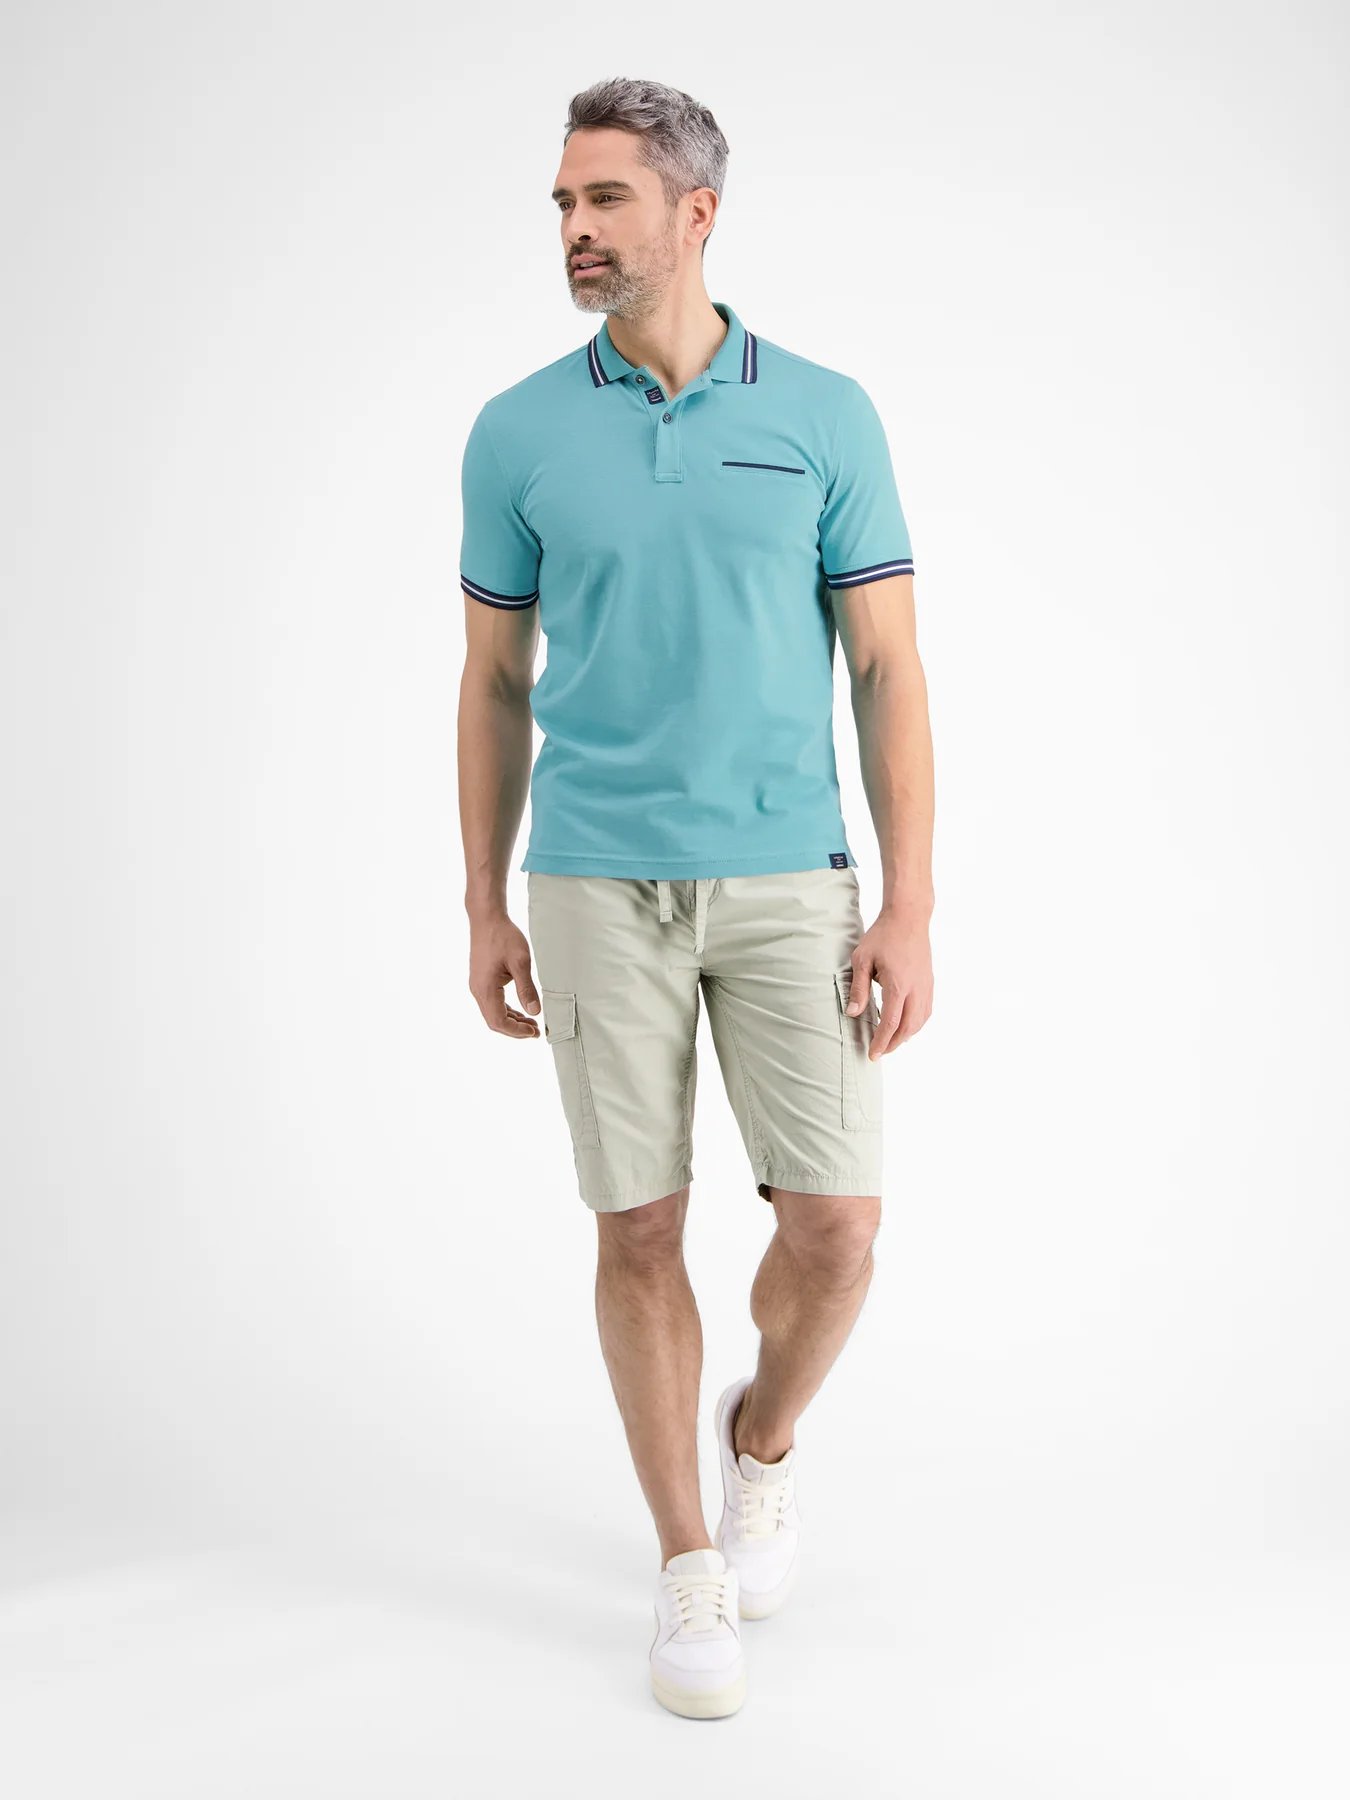 Structure | - LERROS Blues - Light with Turquoise Poloshirt Cotton